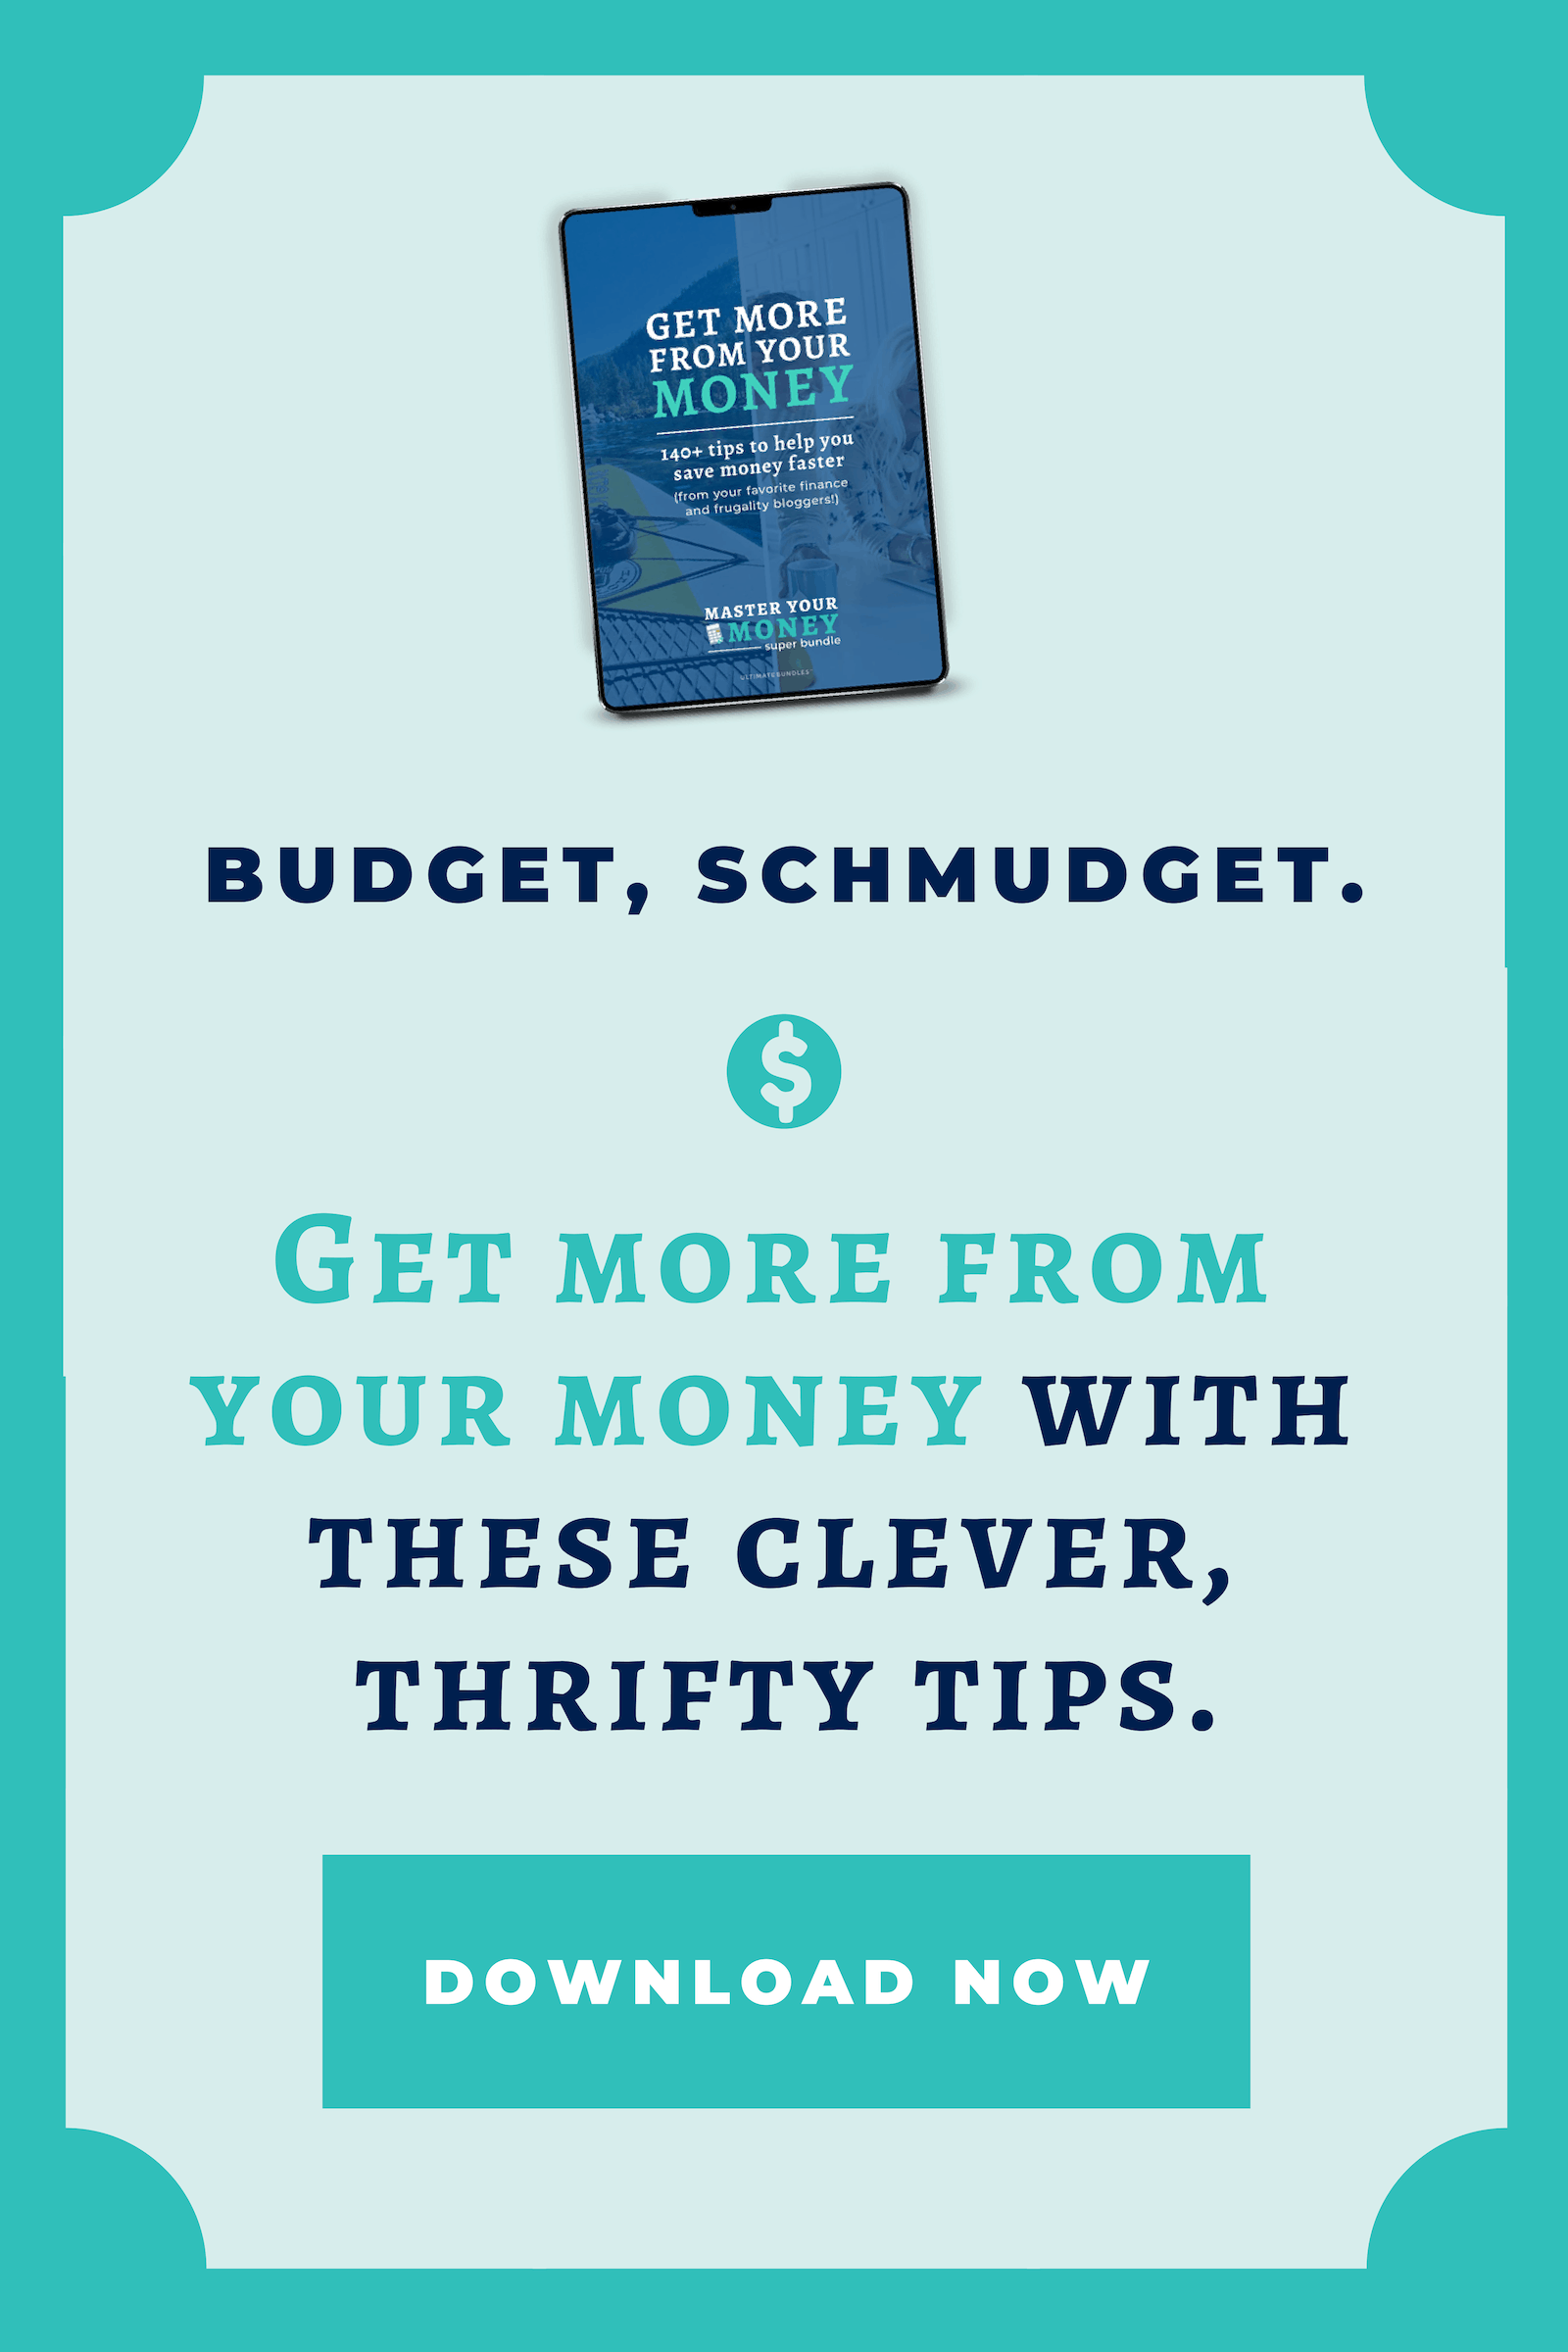 Download the free eBook Get More From Your Money to discover 140 budgeting tips to help you find areas to cut expenses and save money faster.